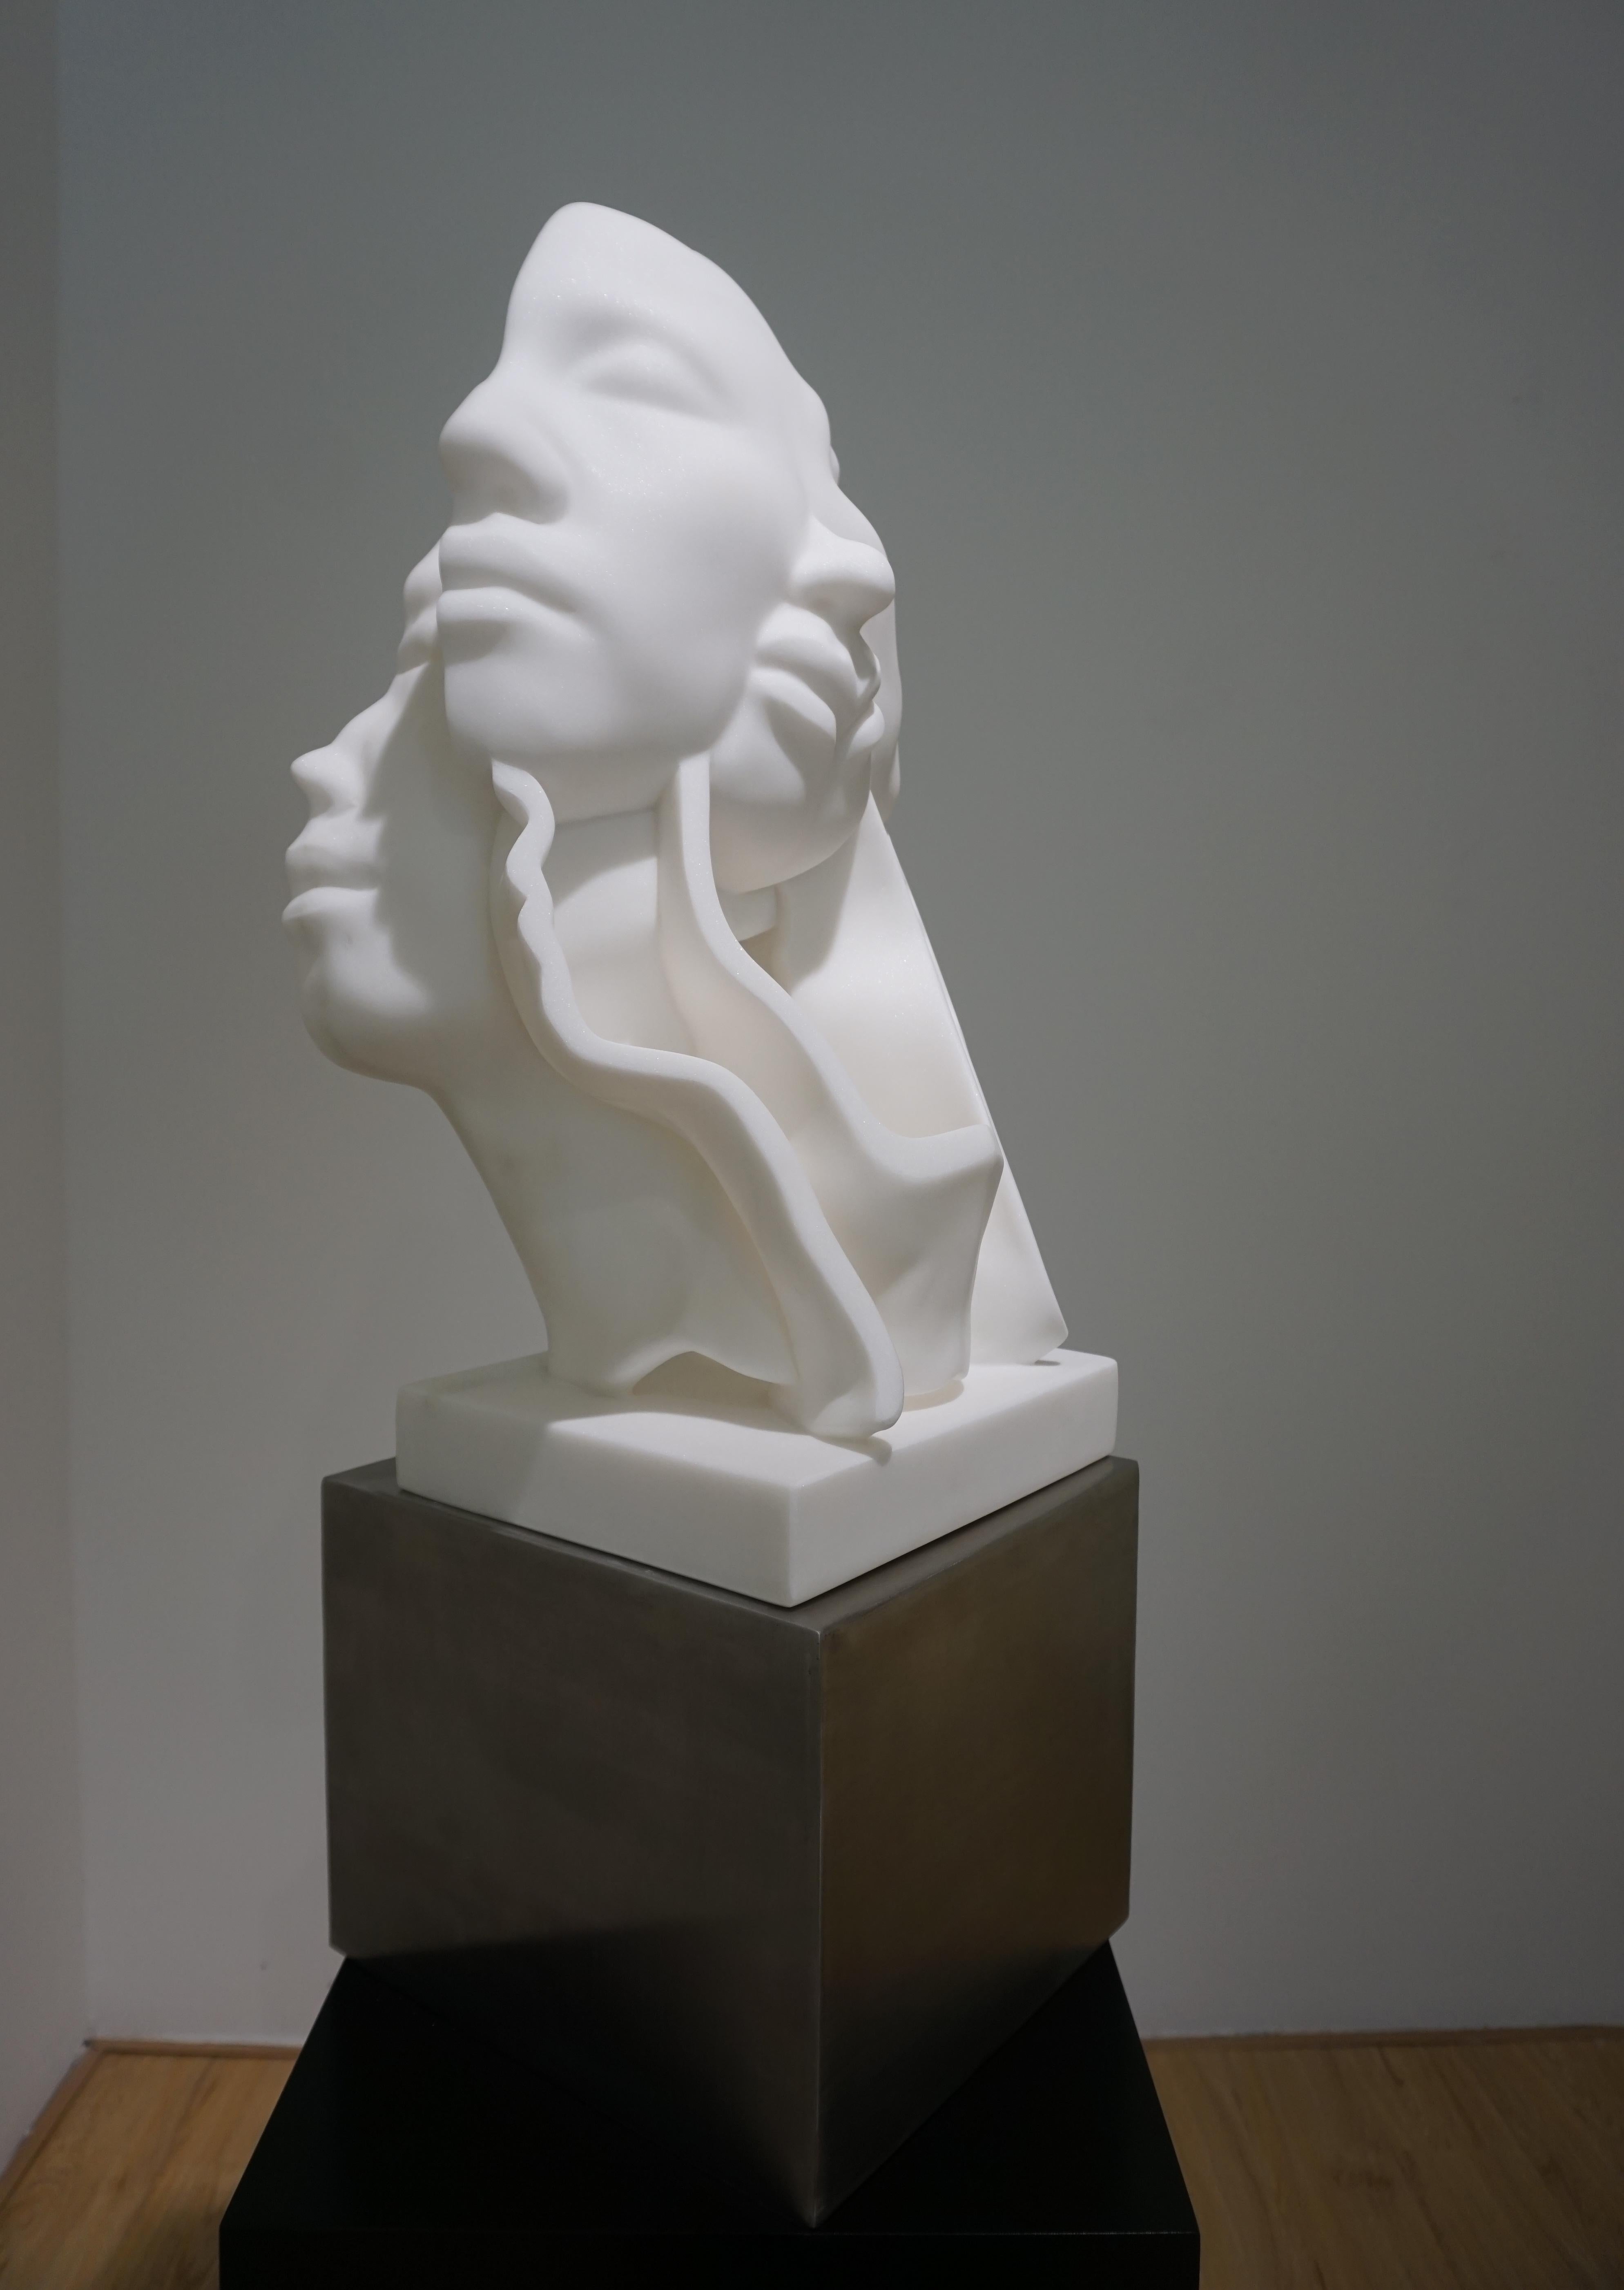 White Marble＆Stainless Sculpture "Faces No1", 2019